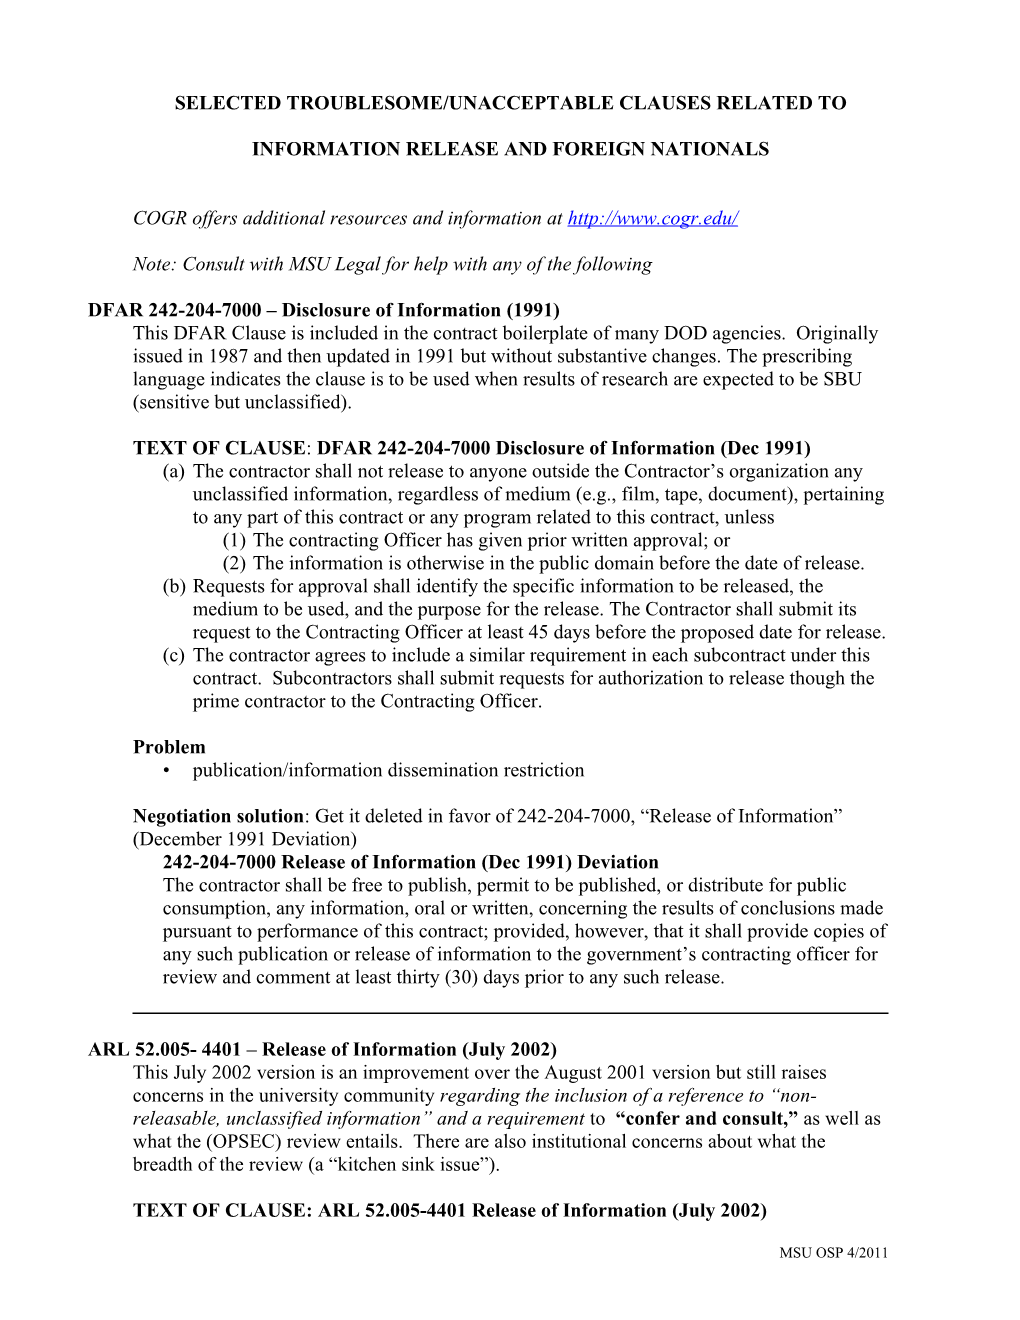 Selected Troublesome/Unacceptable Clauses Related to Information Release and Foreign Nationals